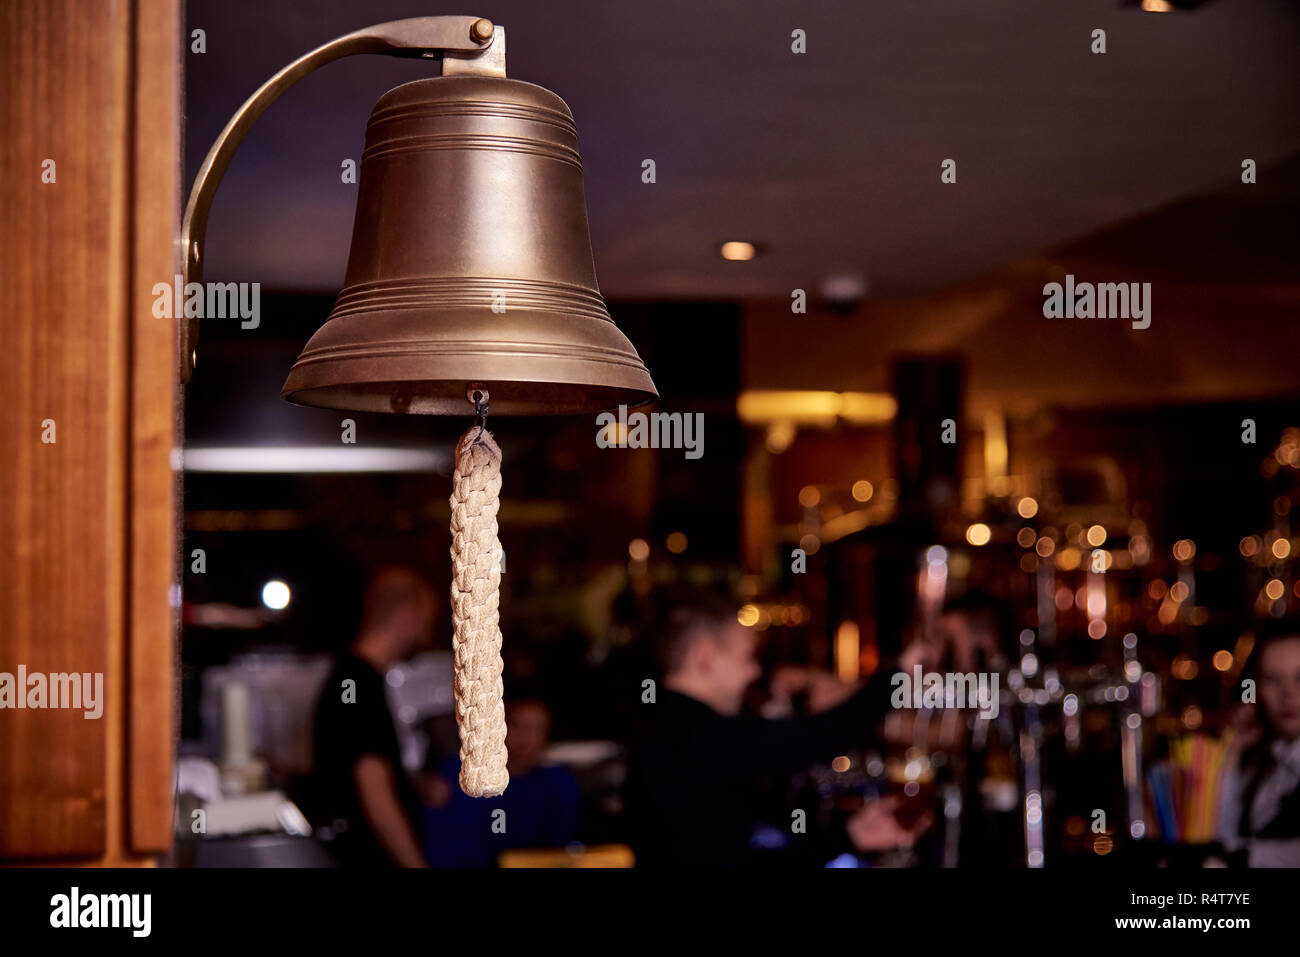 Sea bell close-up on a dark background of the bar. Stock Photo